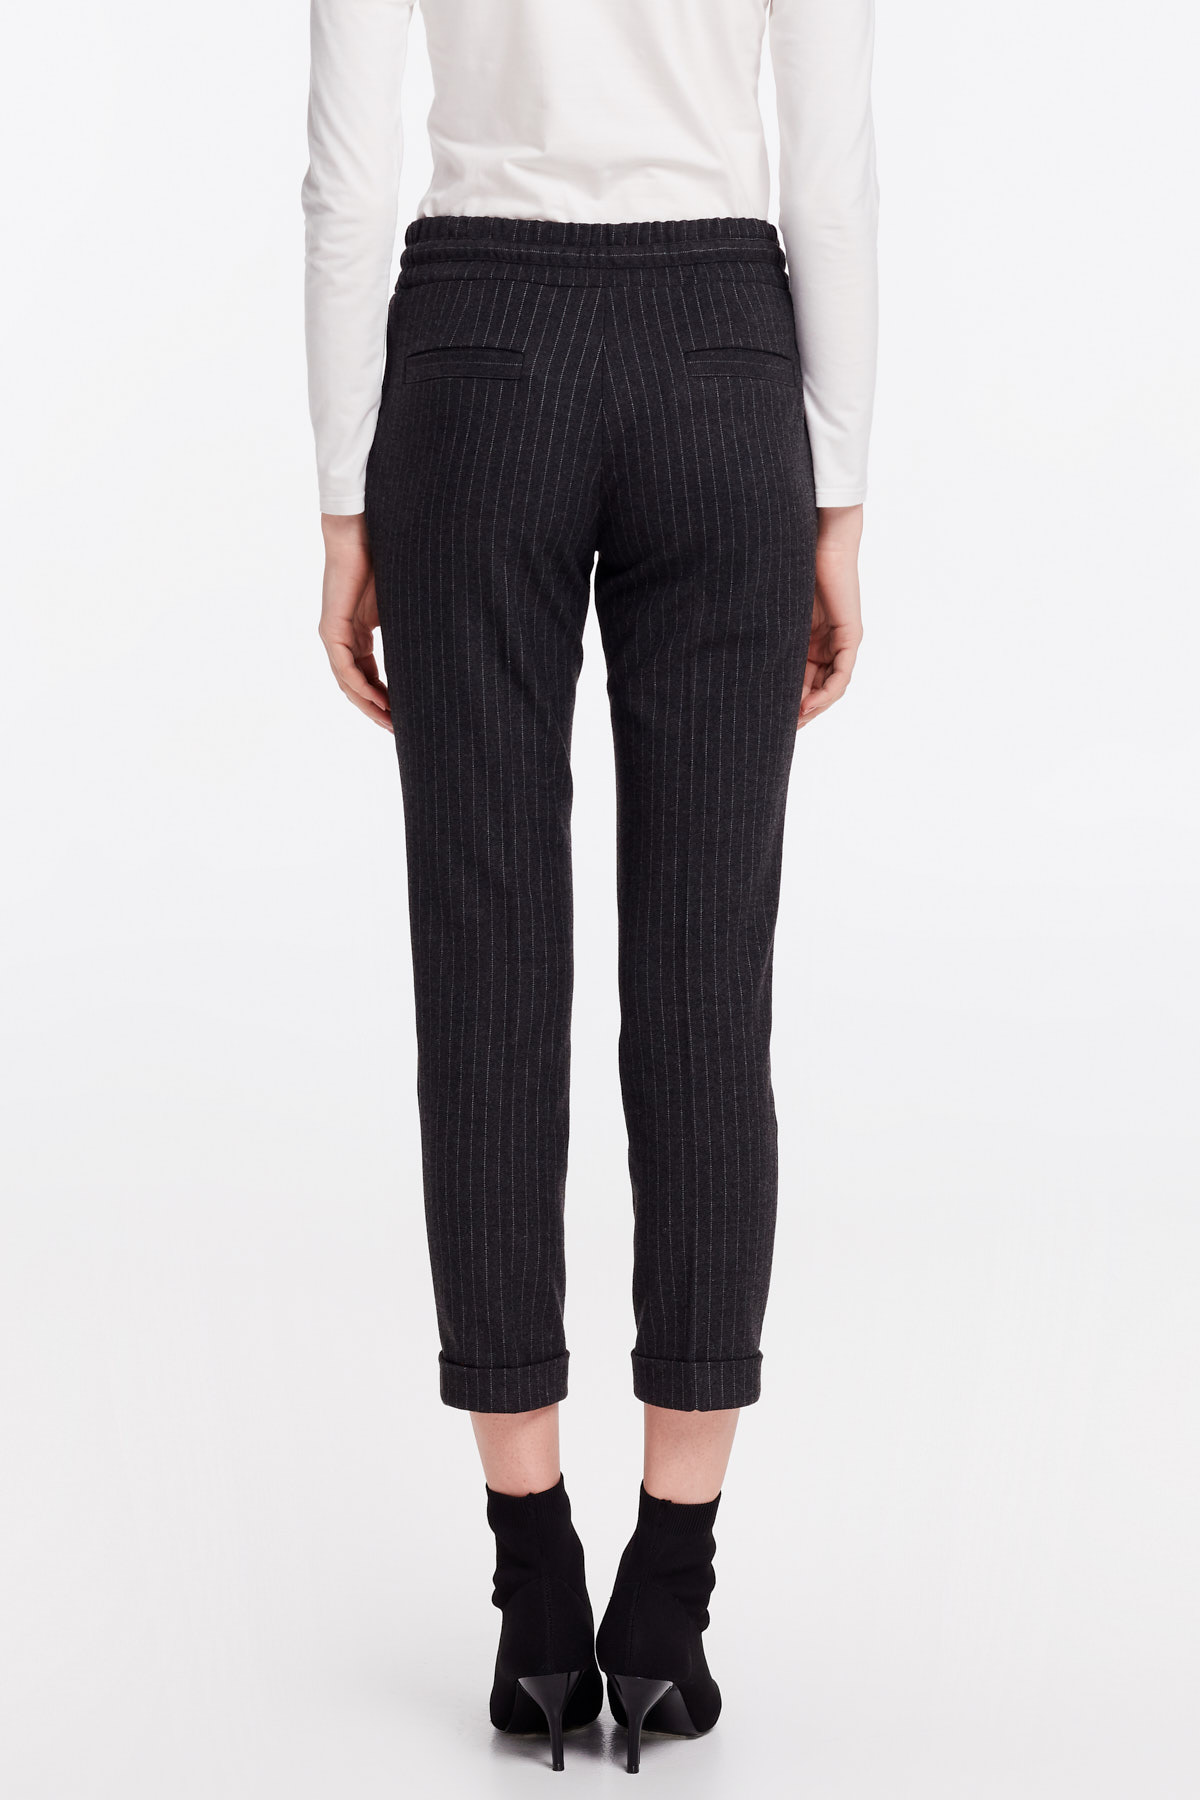 Grey striped pants with an elastic band, photo 4